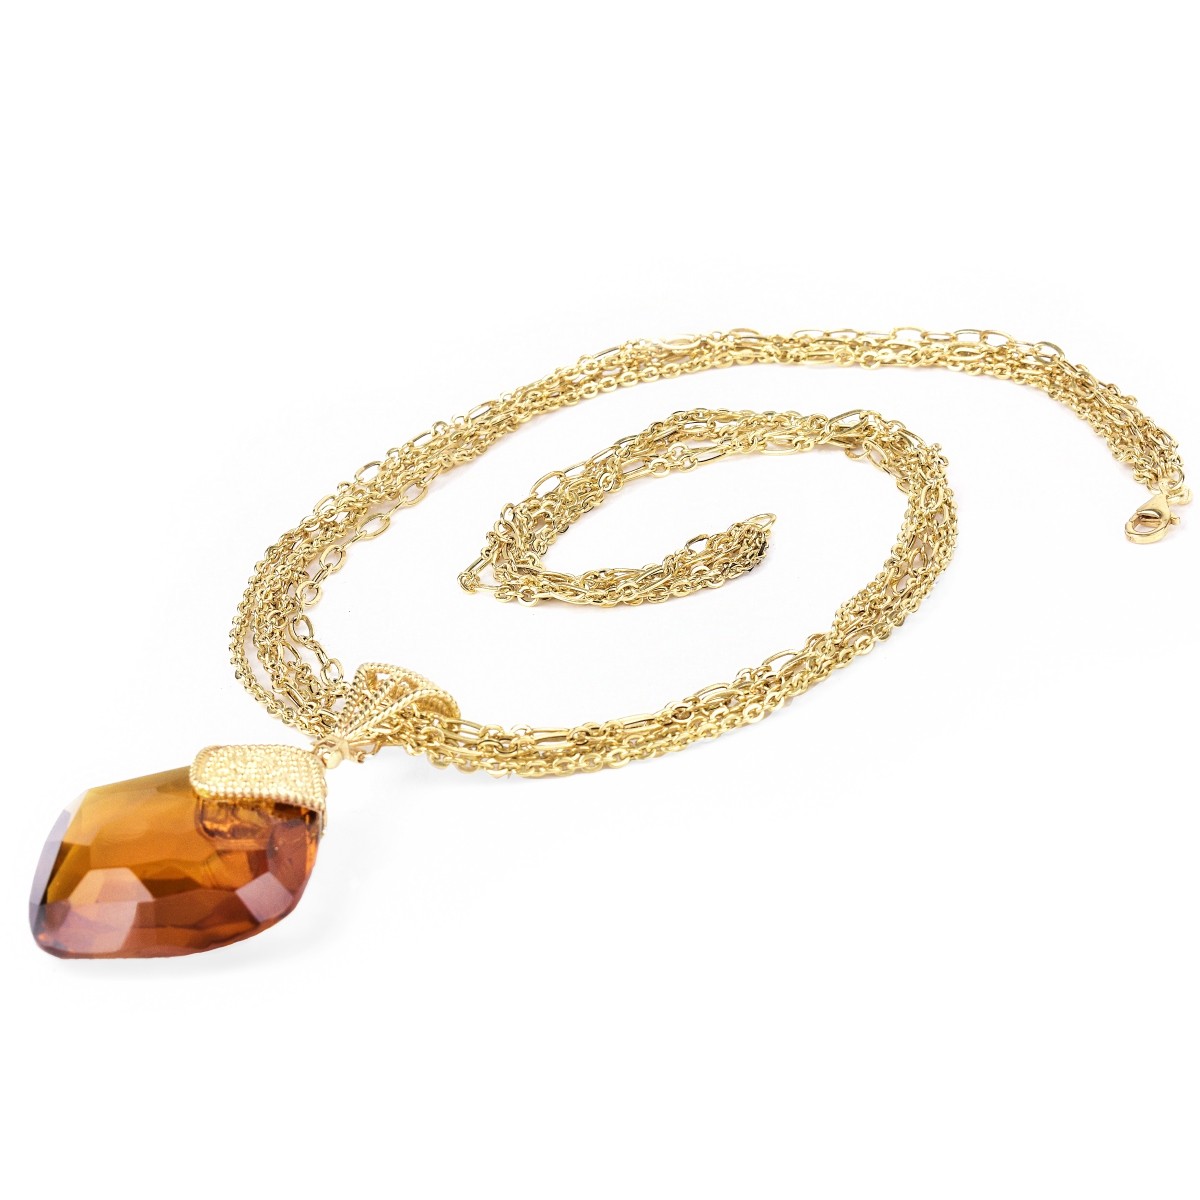 Italian Citrine and 14K Gold Necklace